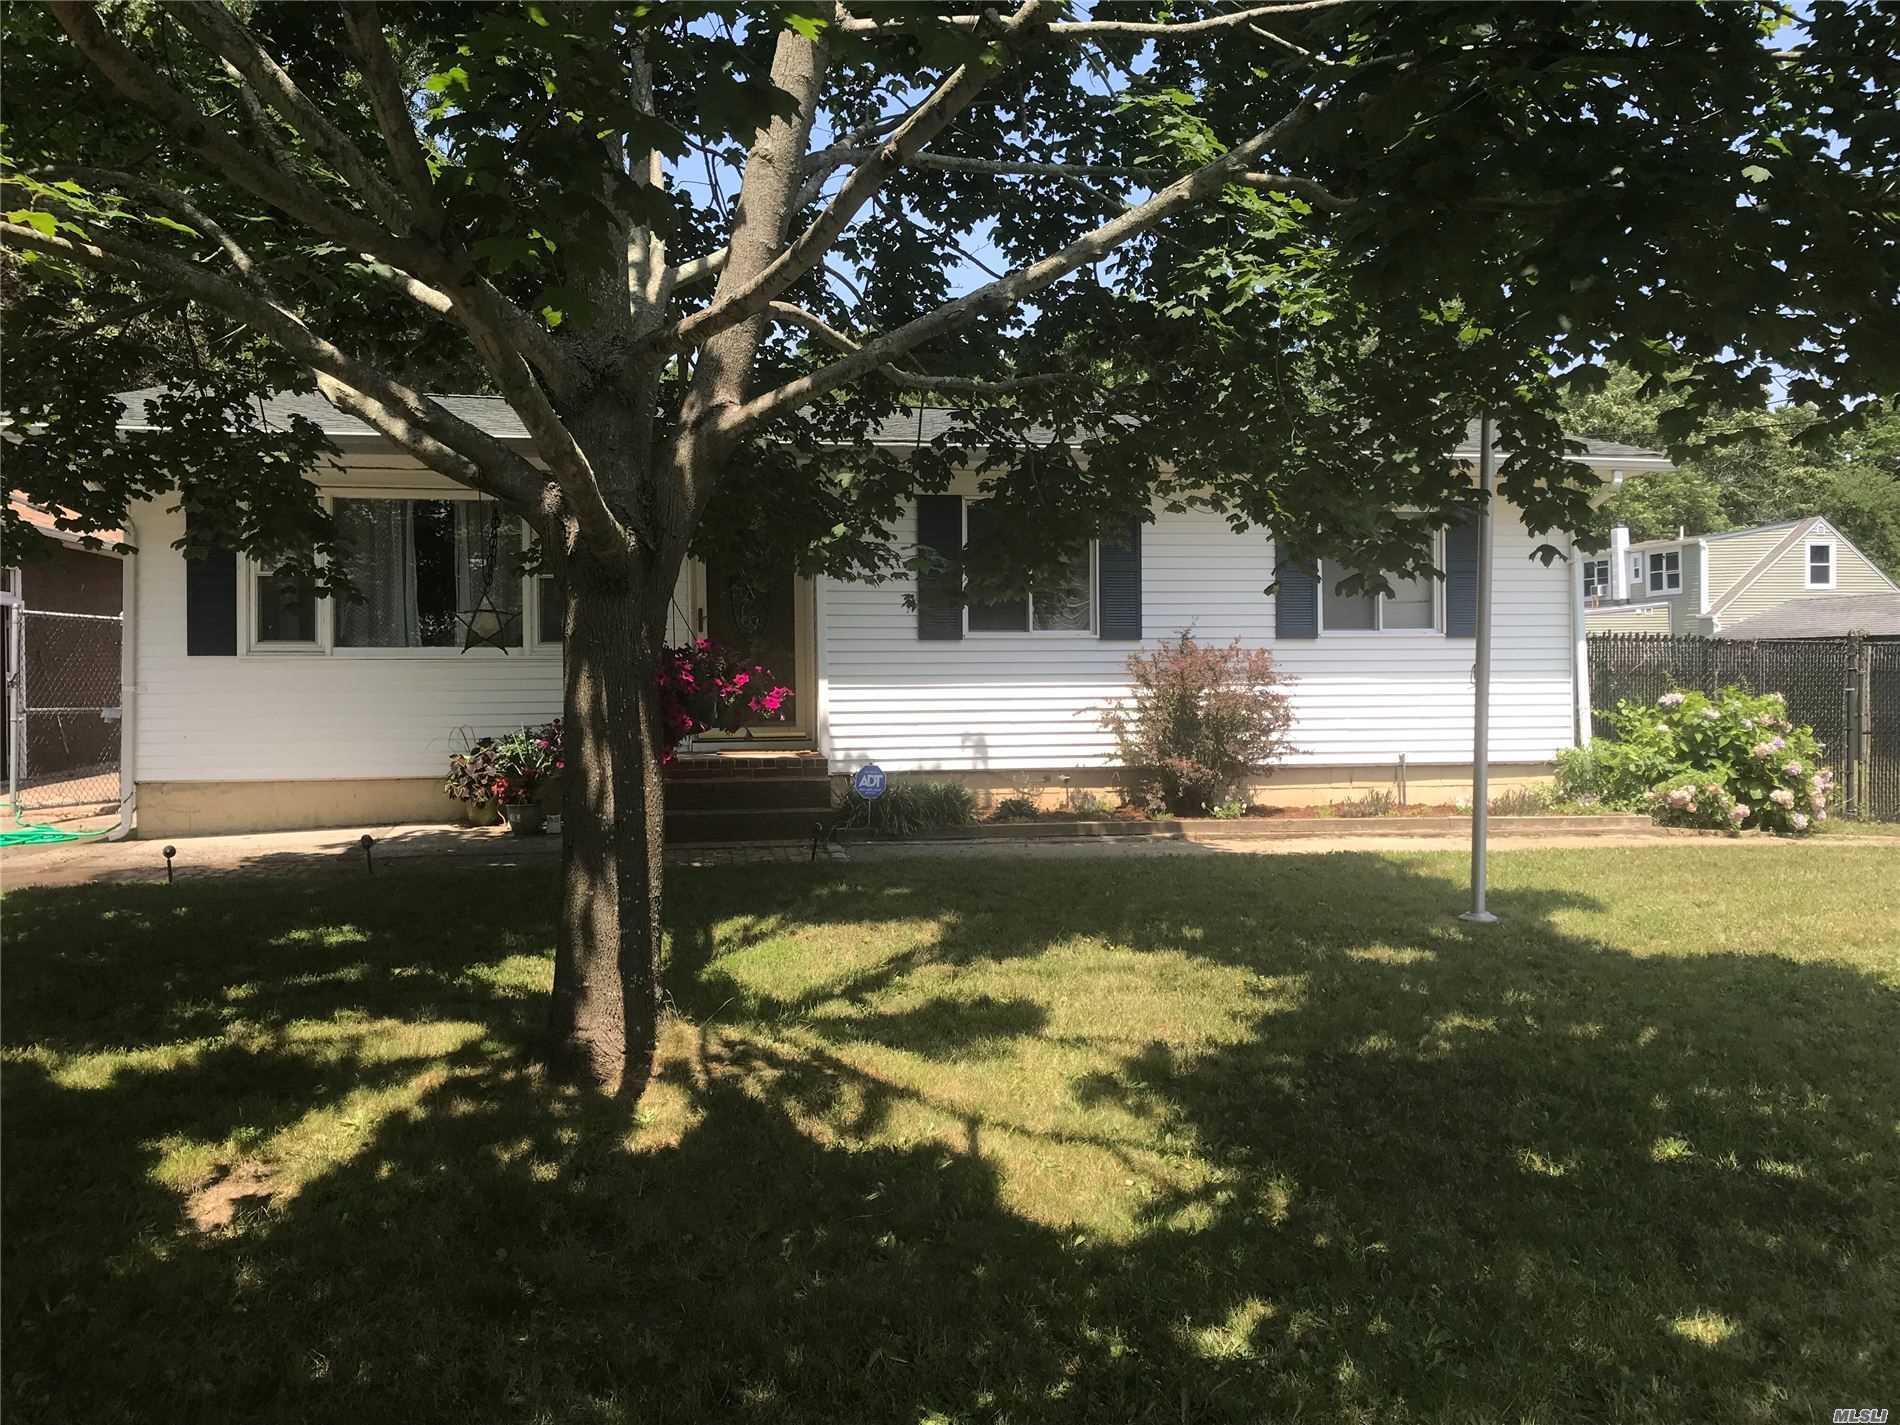 This lovely home features 3 brs 2 full bths, LR, large EIK, Full CAC, finished basement with OSE, Oversized 2 car garage with attic. 3 yr old roof updated plumbing. located close to Osprey park close to shopping and transportation